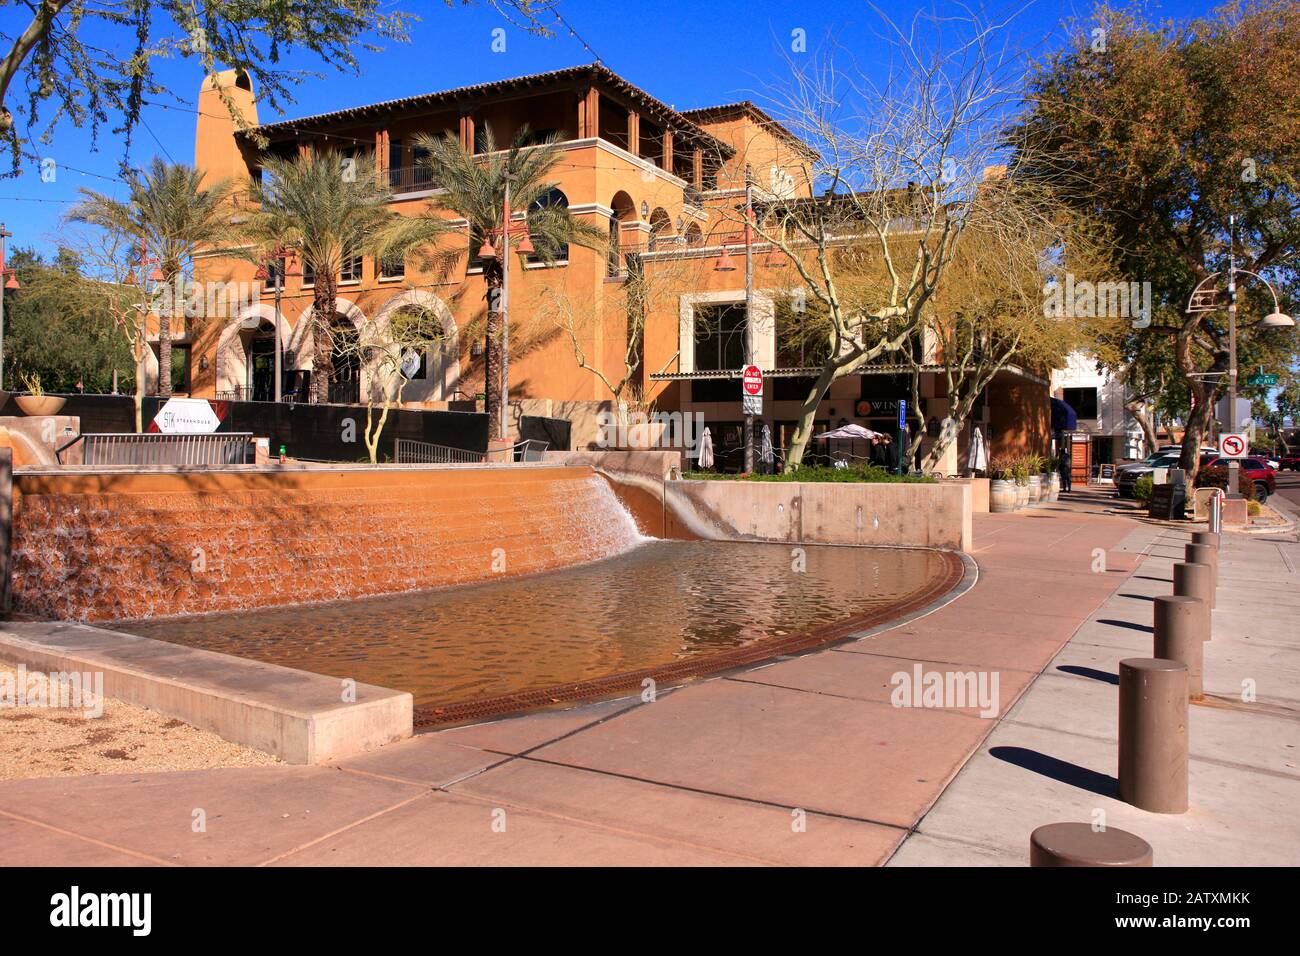 Waterfall park in the Southbridge district of Scottsdale AZ Stock Photo